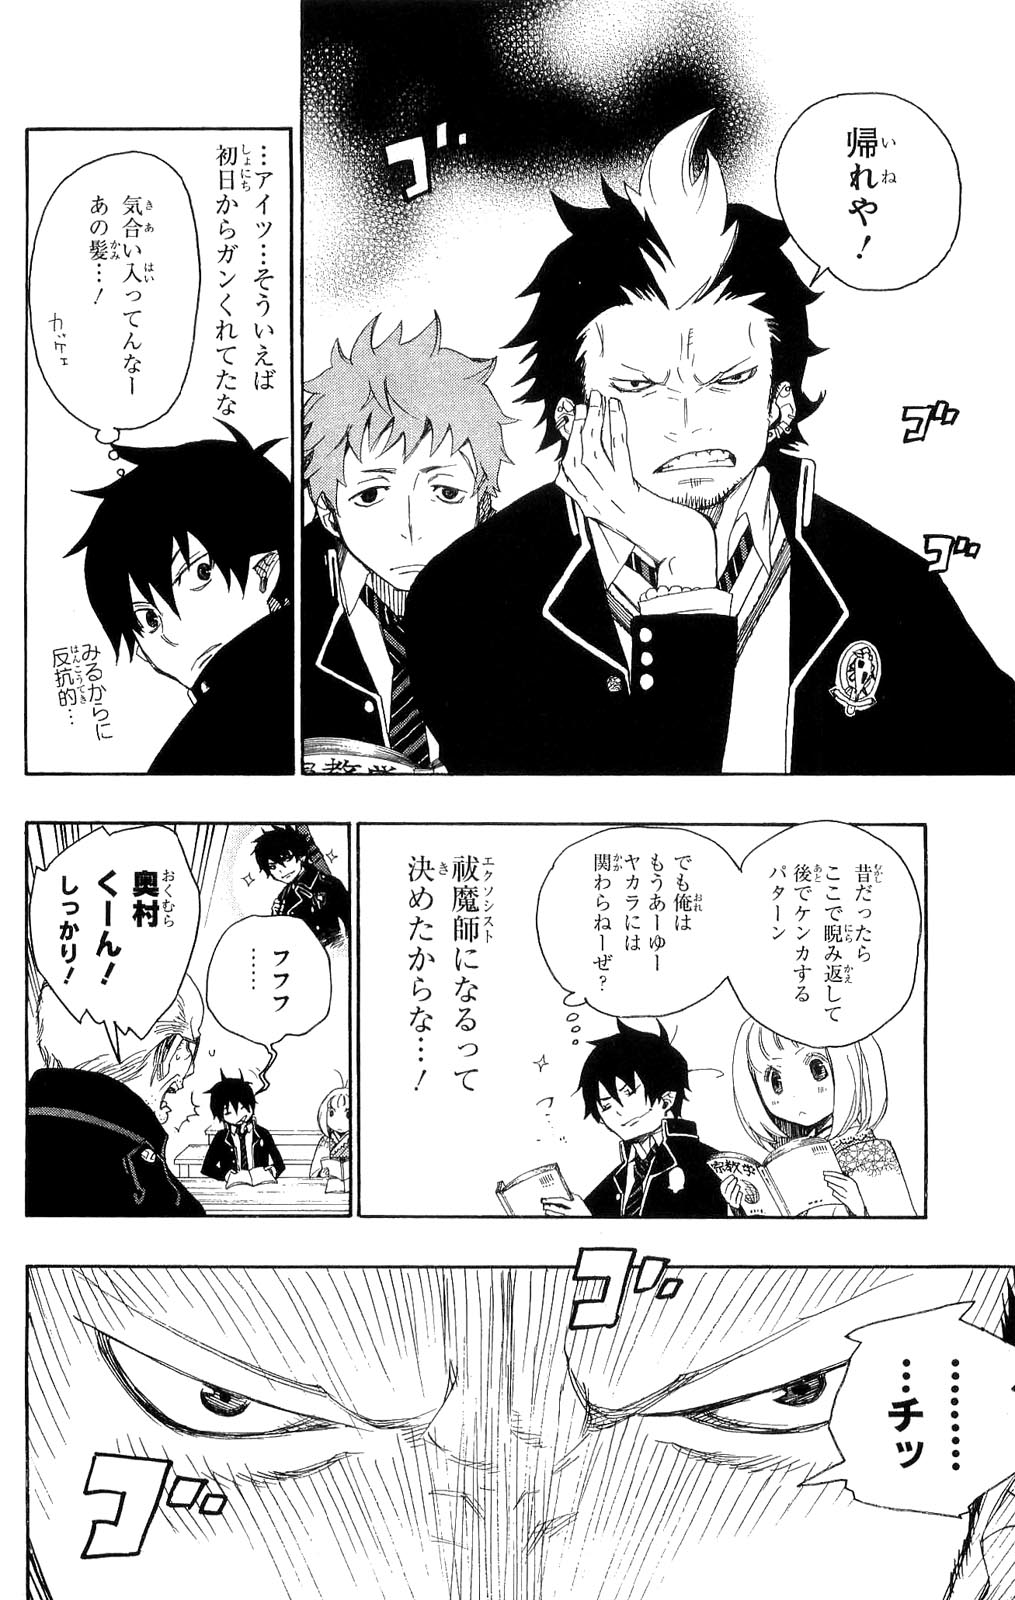 Ao no Exorcist - Chapter 4 - Page 2